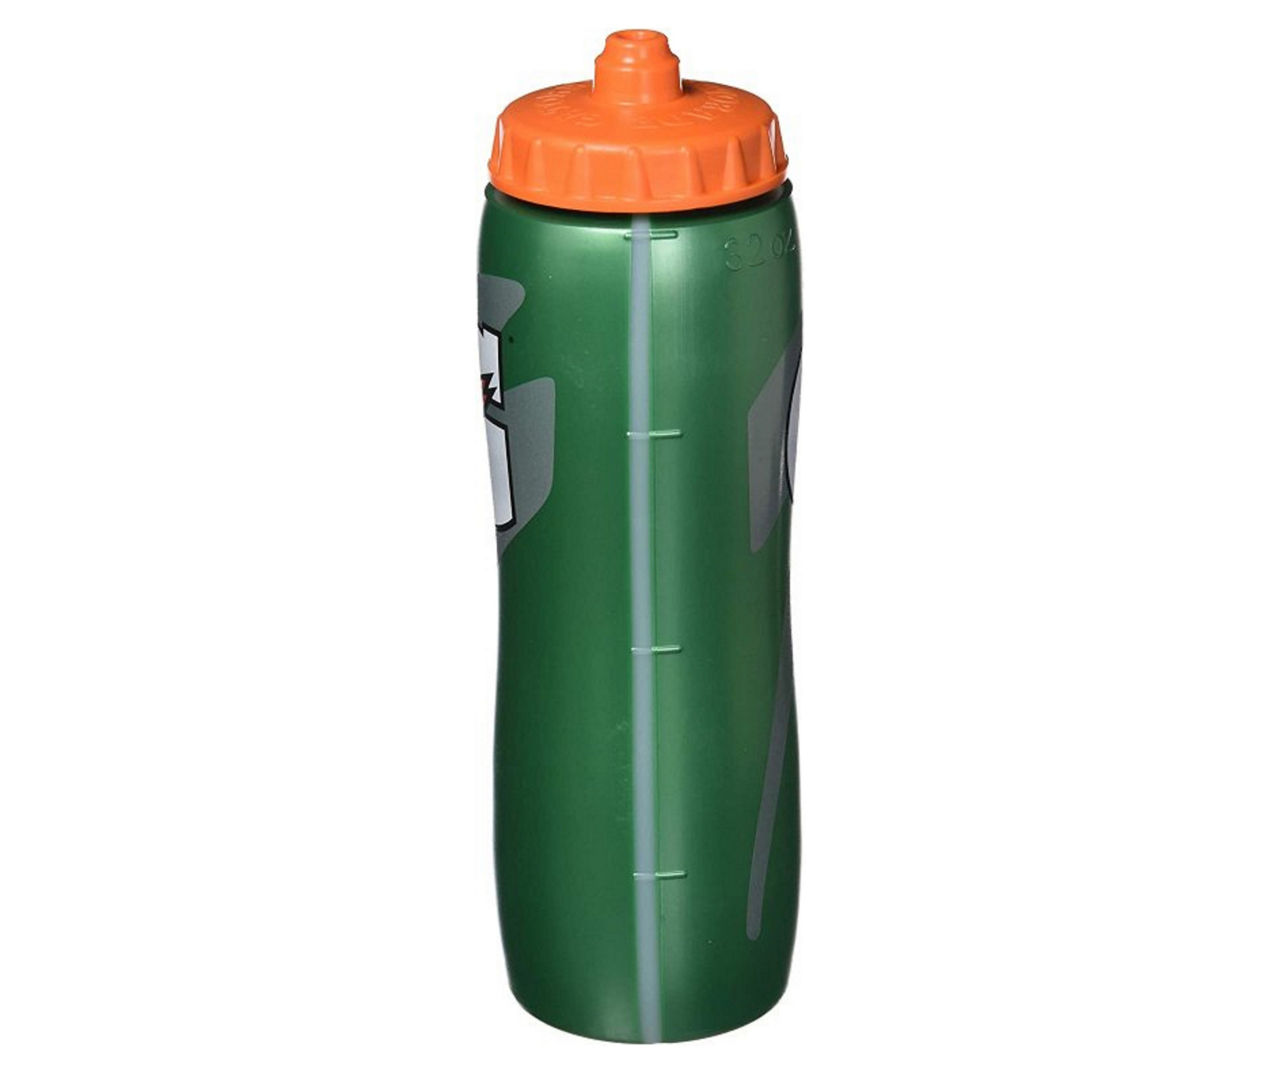 The Big Squeeze Water Bottle